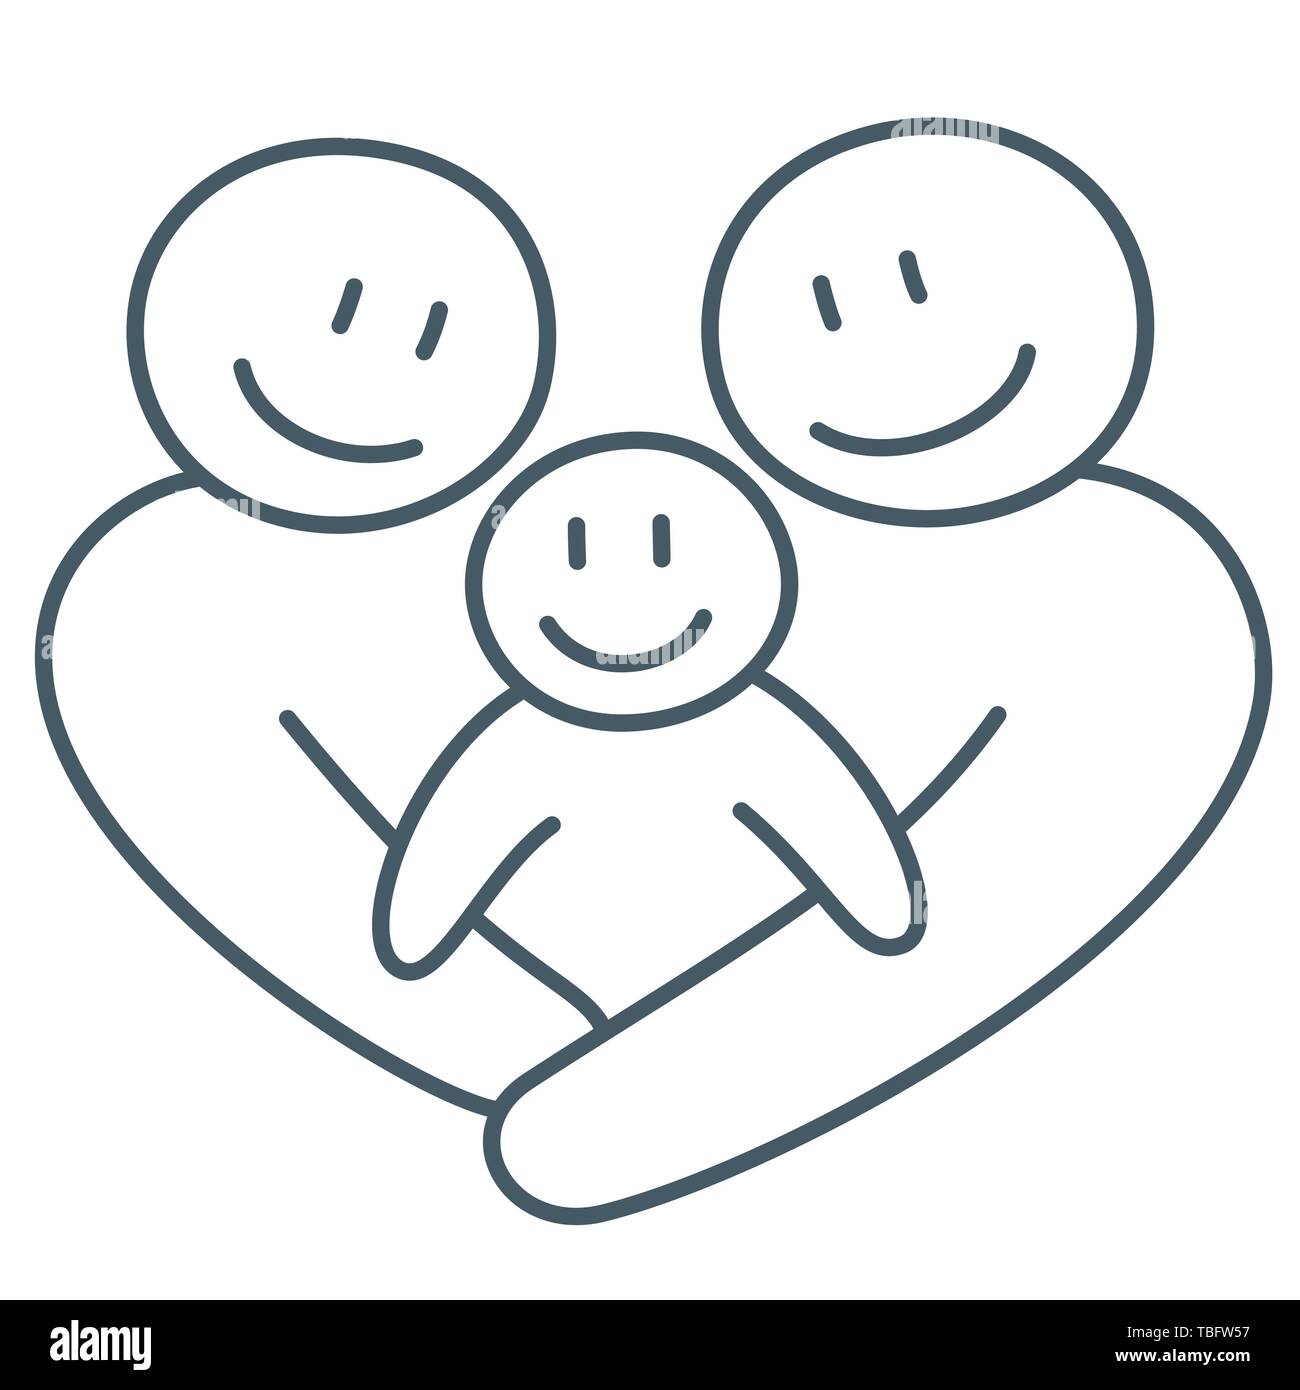 kids drawing happy family picture Stock Vector Image & Art - Alamy